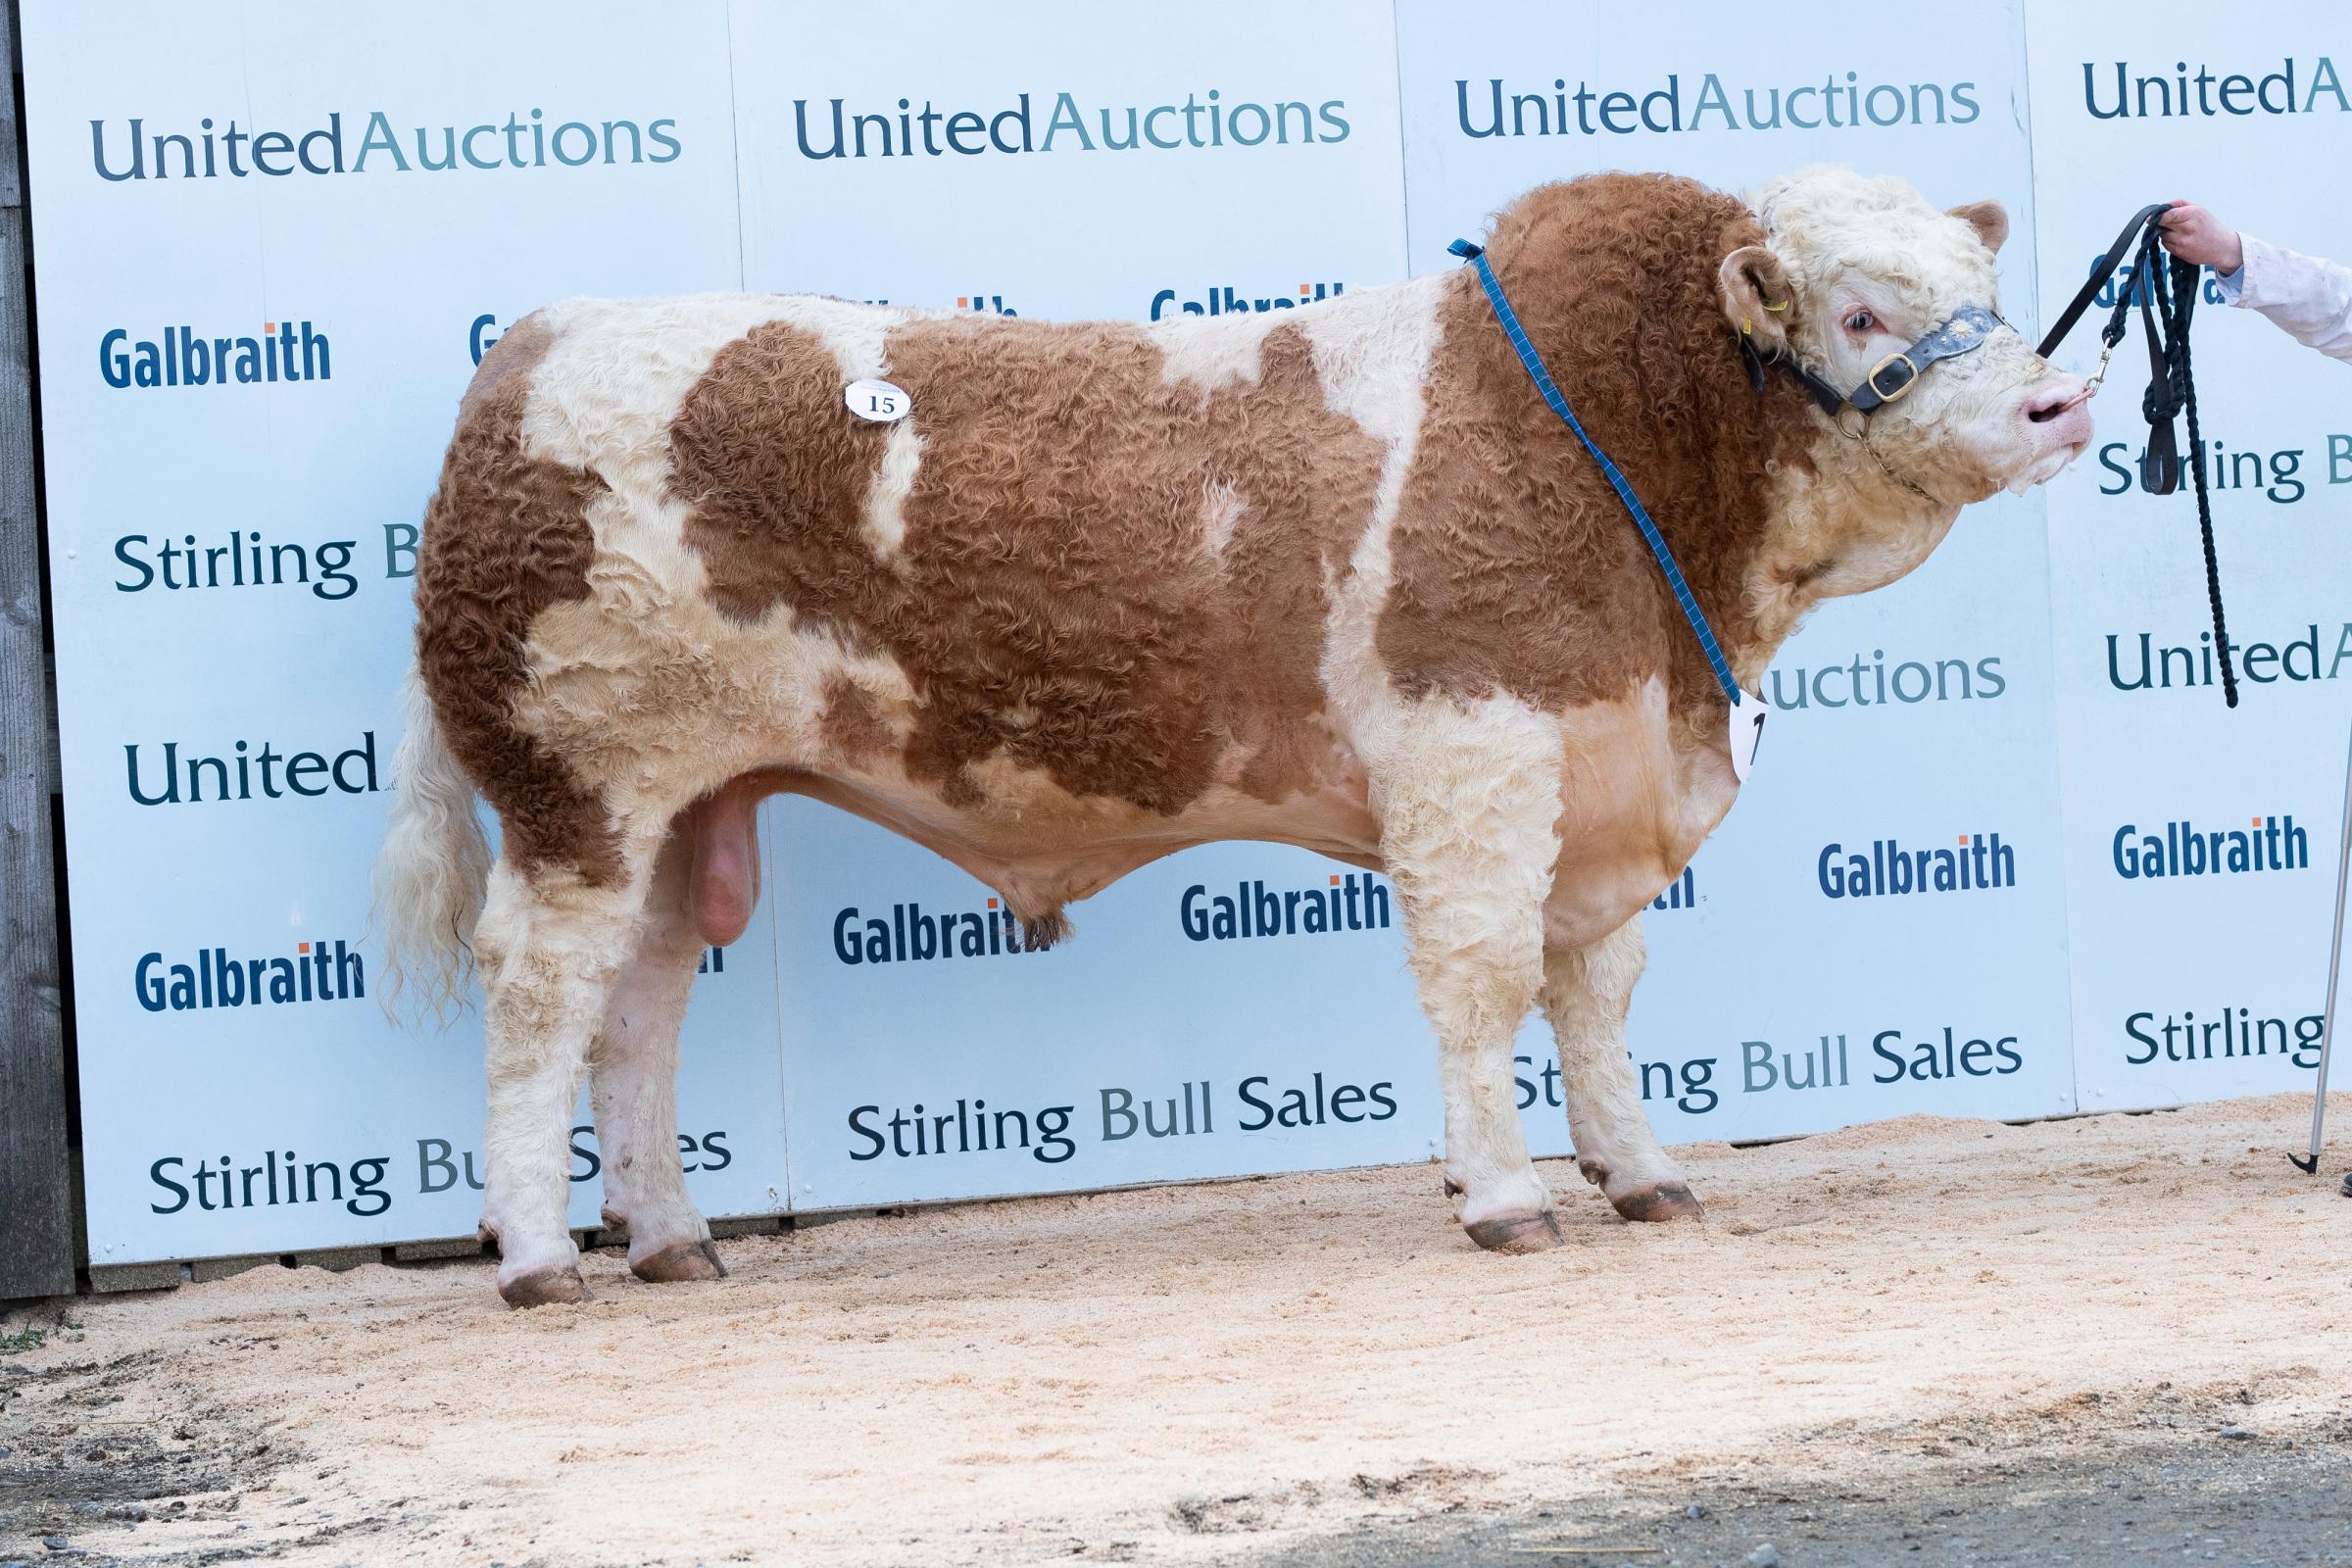 Second top price was 15,000gns paid for Backmuir Kraken from Reece and Andrew Simmers Ref:RH270221421 Rob Haining / The Scottish Farmer...